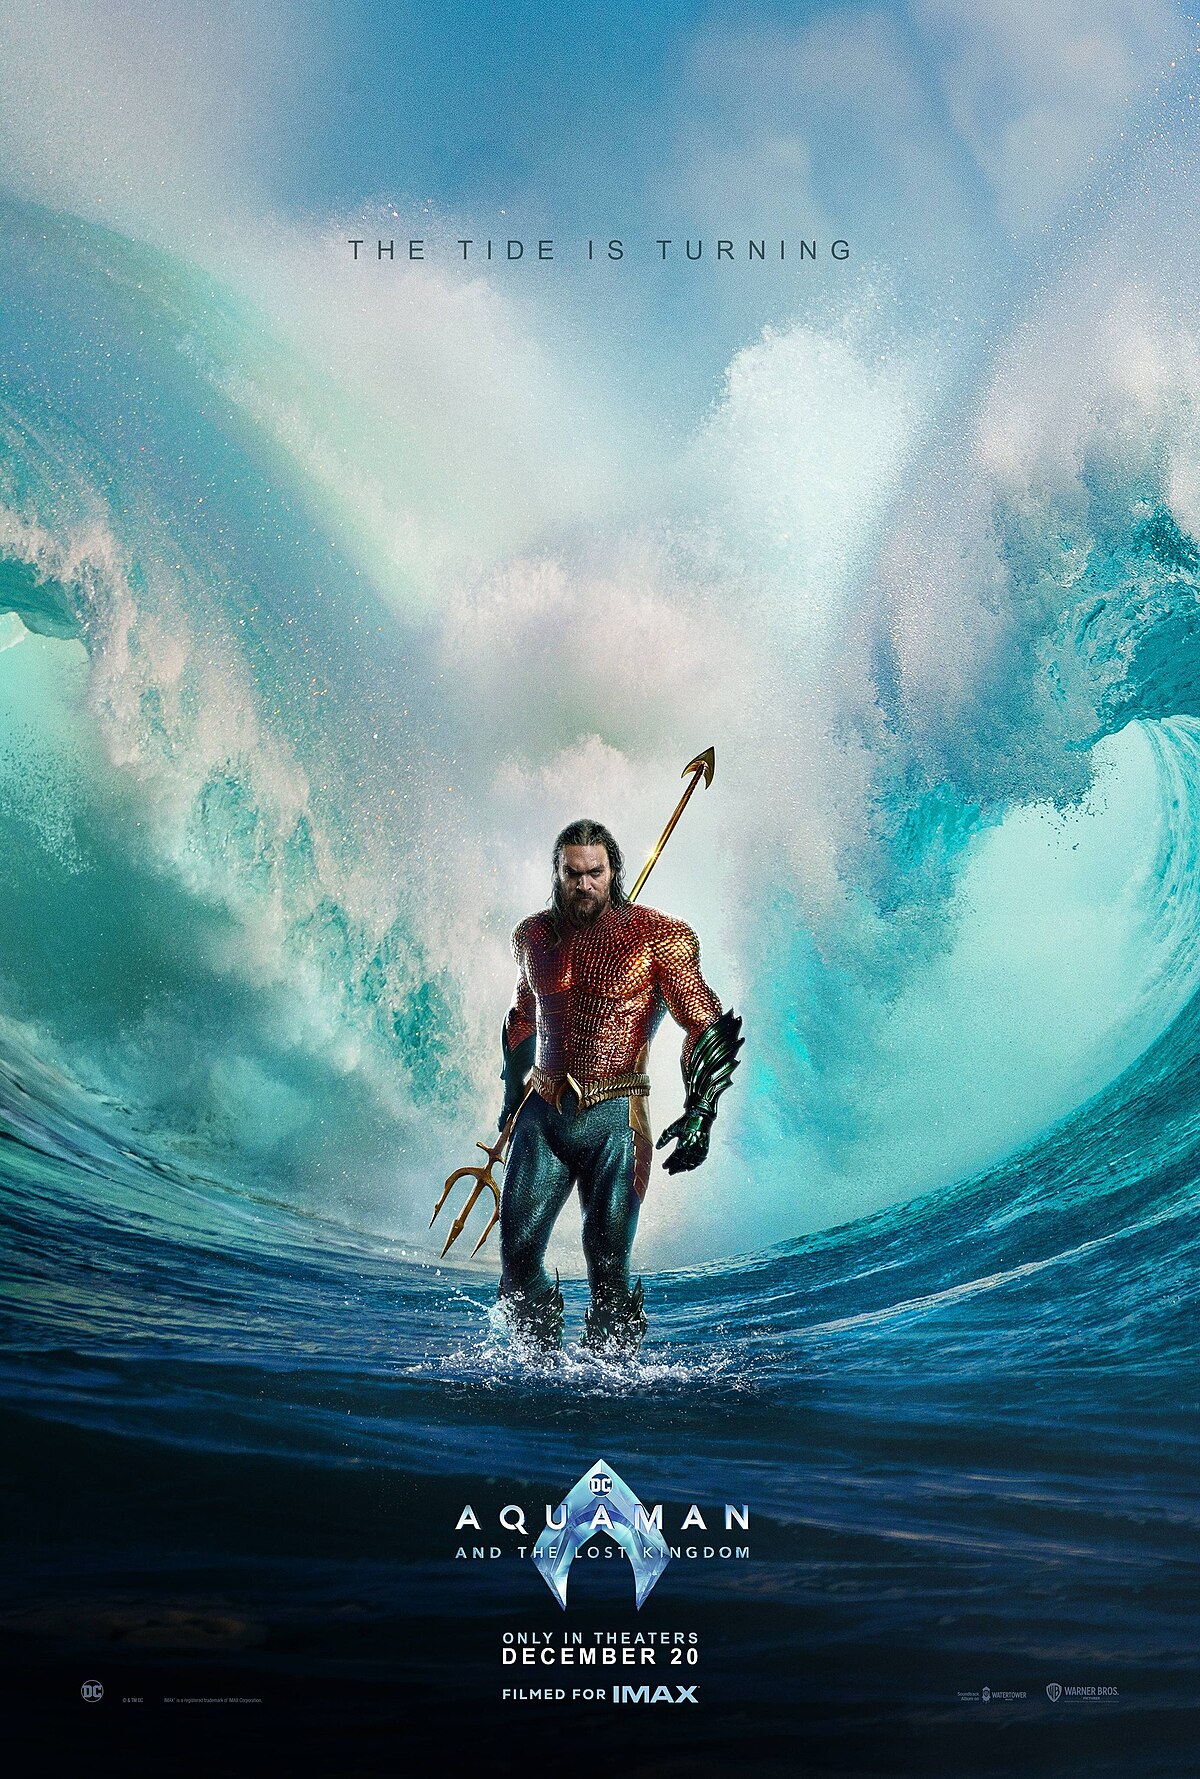 Aquaman and the Lost Kingdom: Last film in DC extended universe teased  trailer